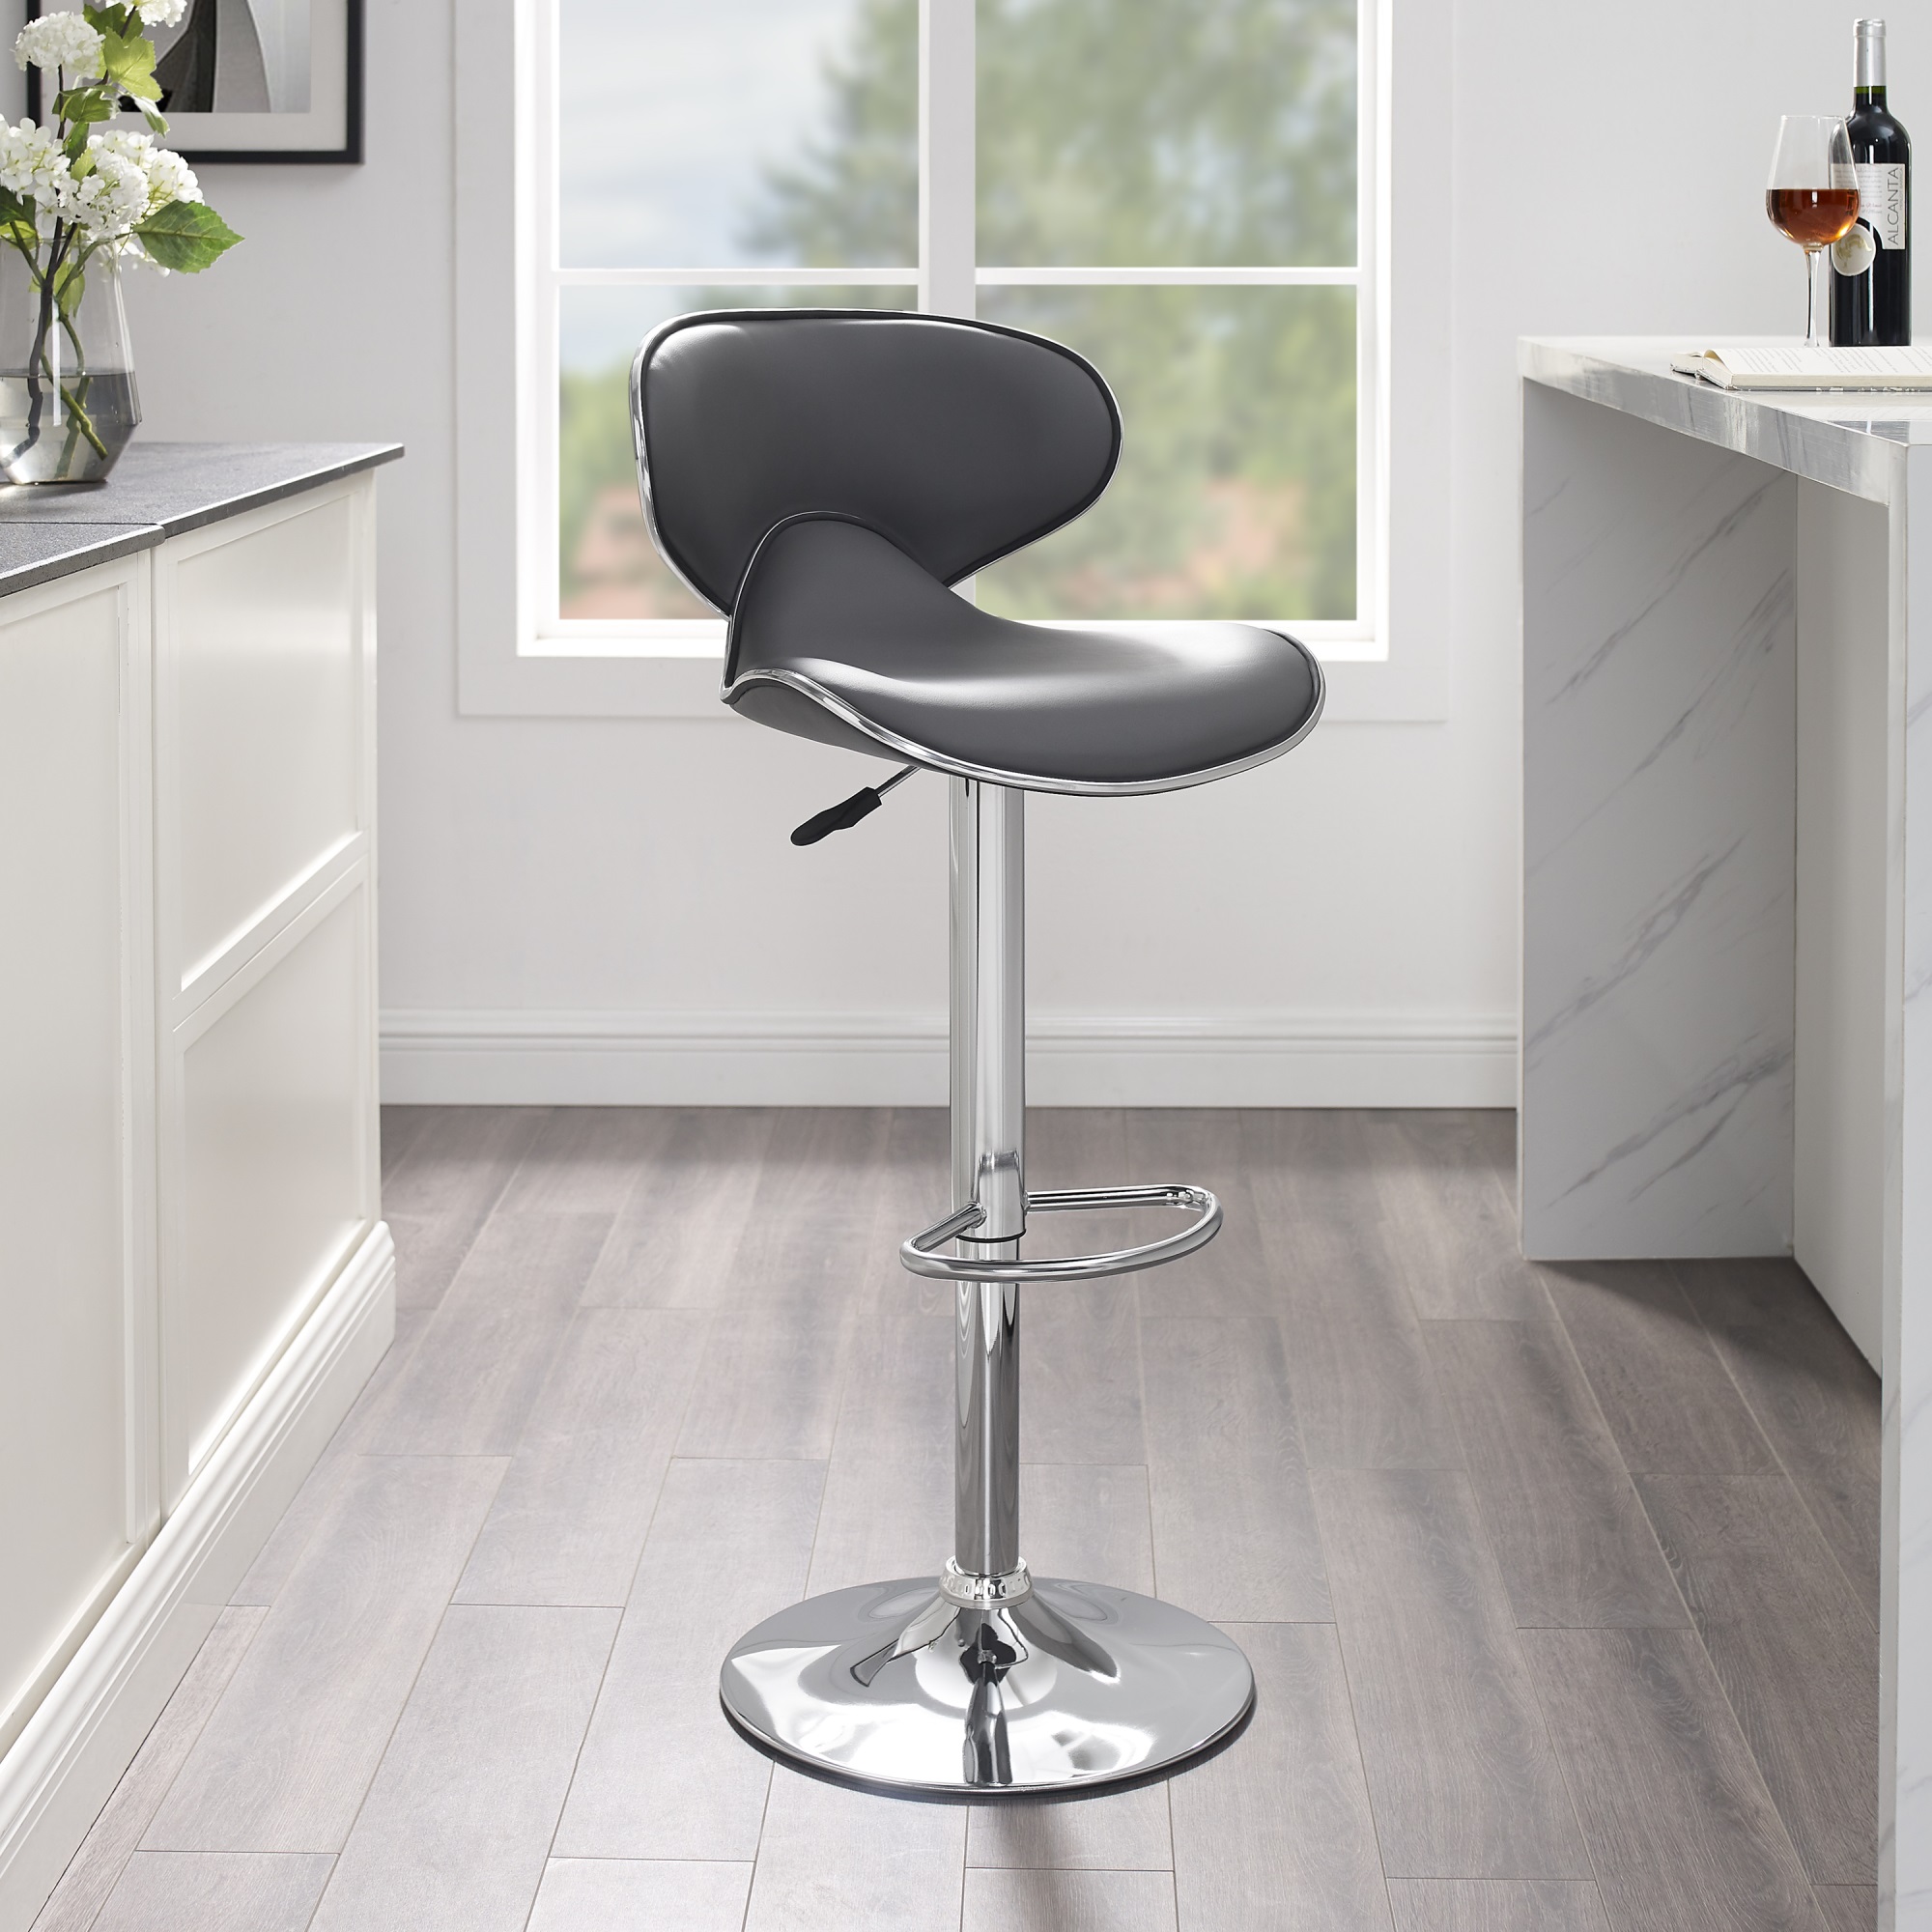 Powell Beldon 24-32" Indoor Adjustable Metal Bar Stool with Swivel, Gray Faux Leather - image 2 of 10